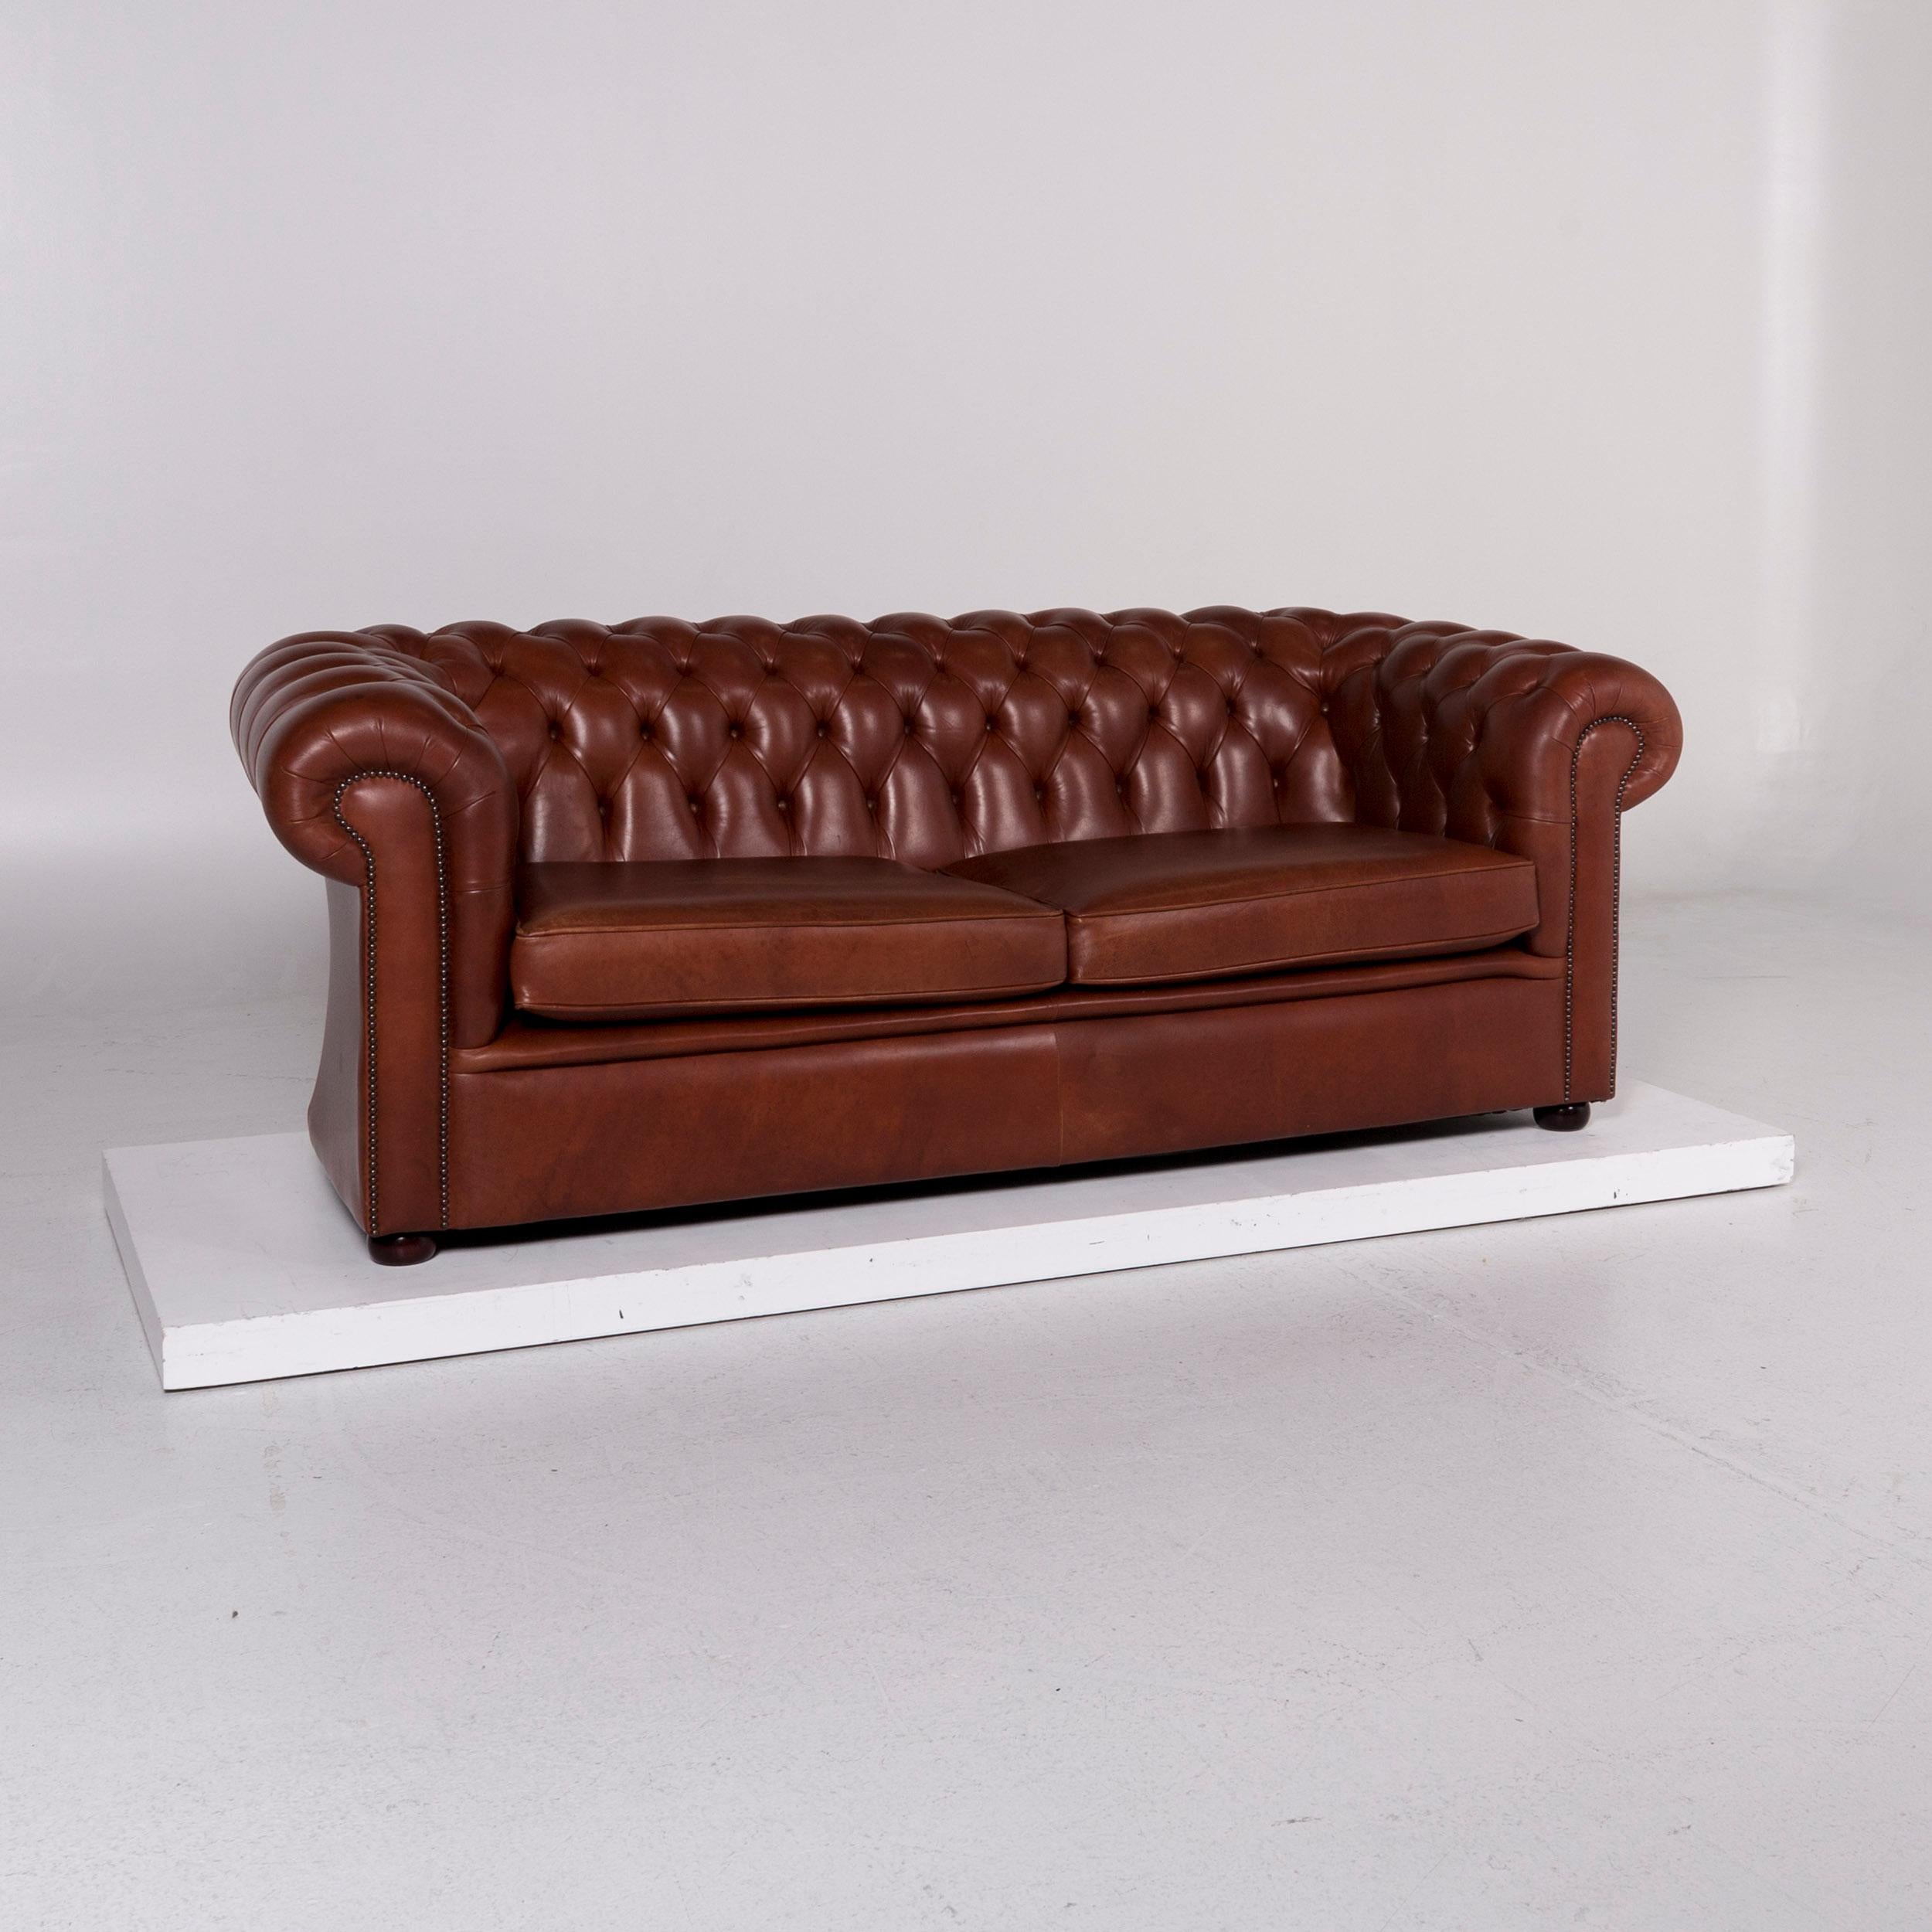 We bring to you a Chesterfield leather sofa set red brown 1 three-seat 1 two-seat.
 
 Product measurements in centimeters:
 
Depth 97
Width 220
Height 84
Seat-height 48
Rest-height 80
Seat-depth 61
Seat-width 94
Back-height 37.
 